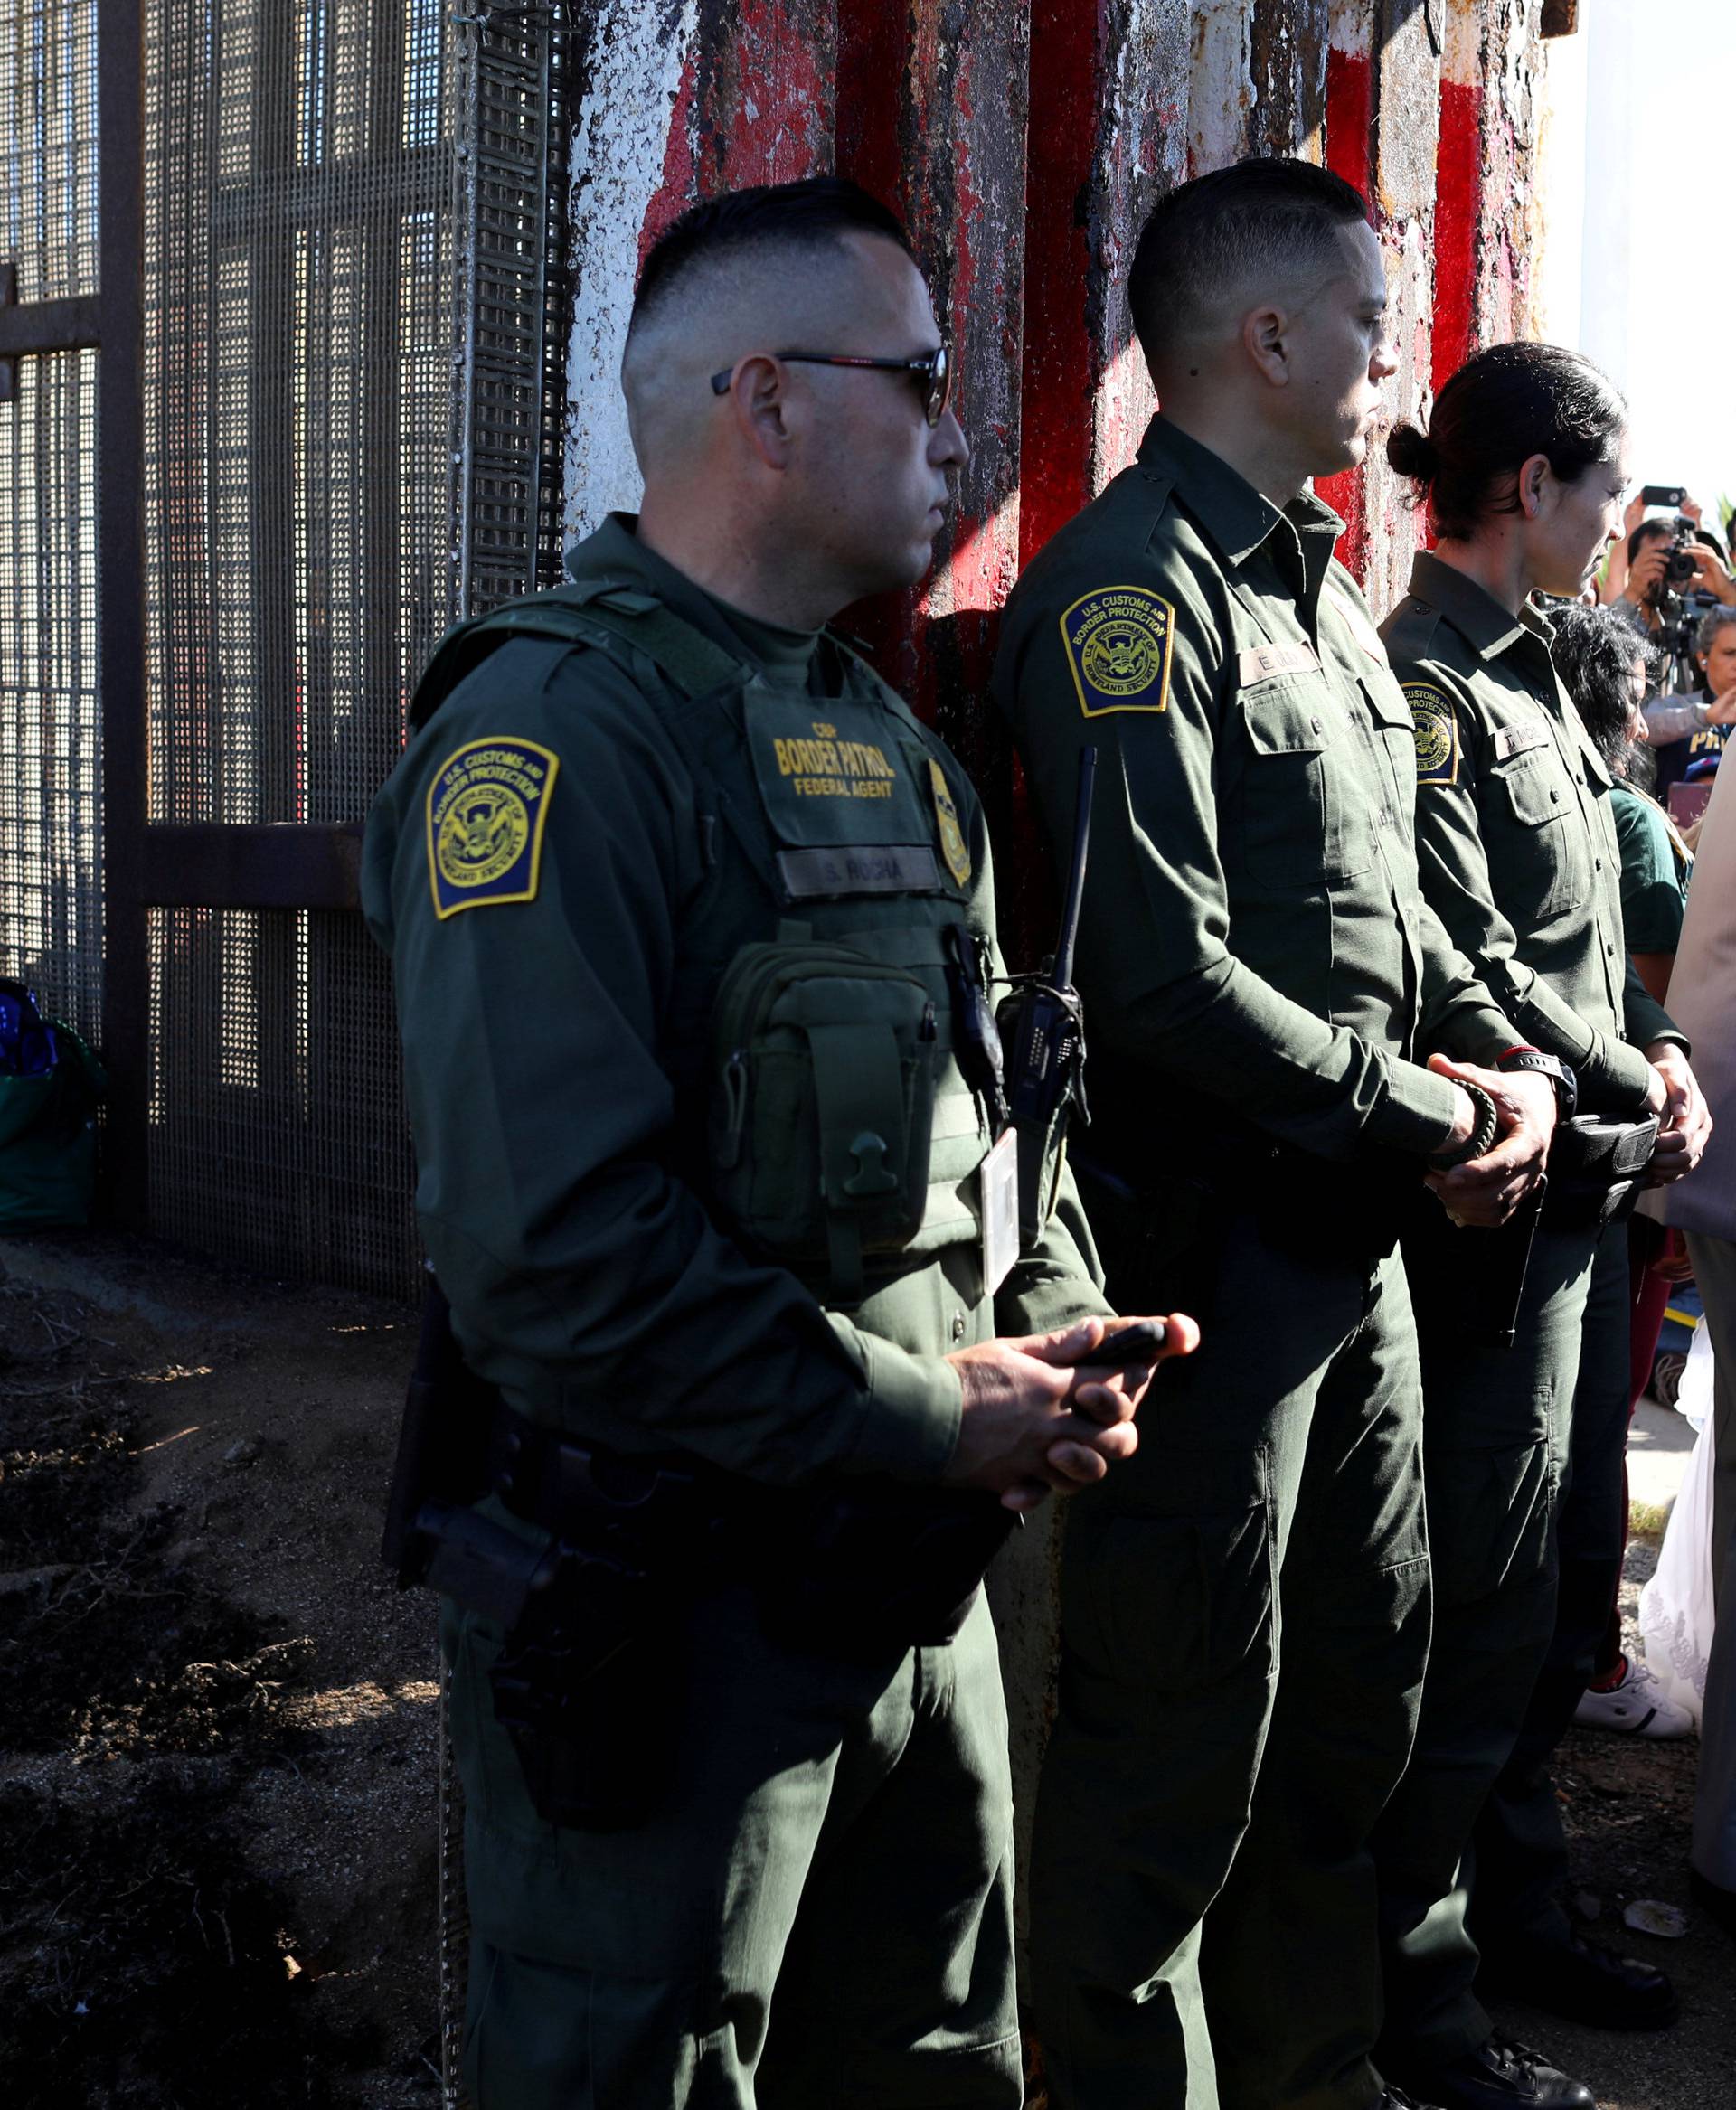 U.S. resident Brian Houston marries Evelia Reyes as U.S. Border Patrol agents open a single gate in the border wall to allow selected families to visit along the U.S.-Mexico border in San Diego